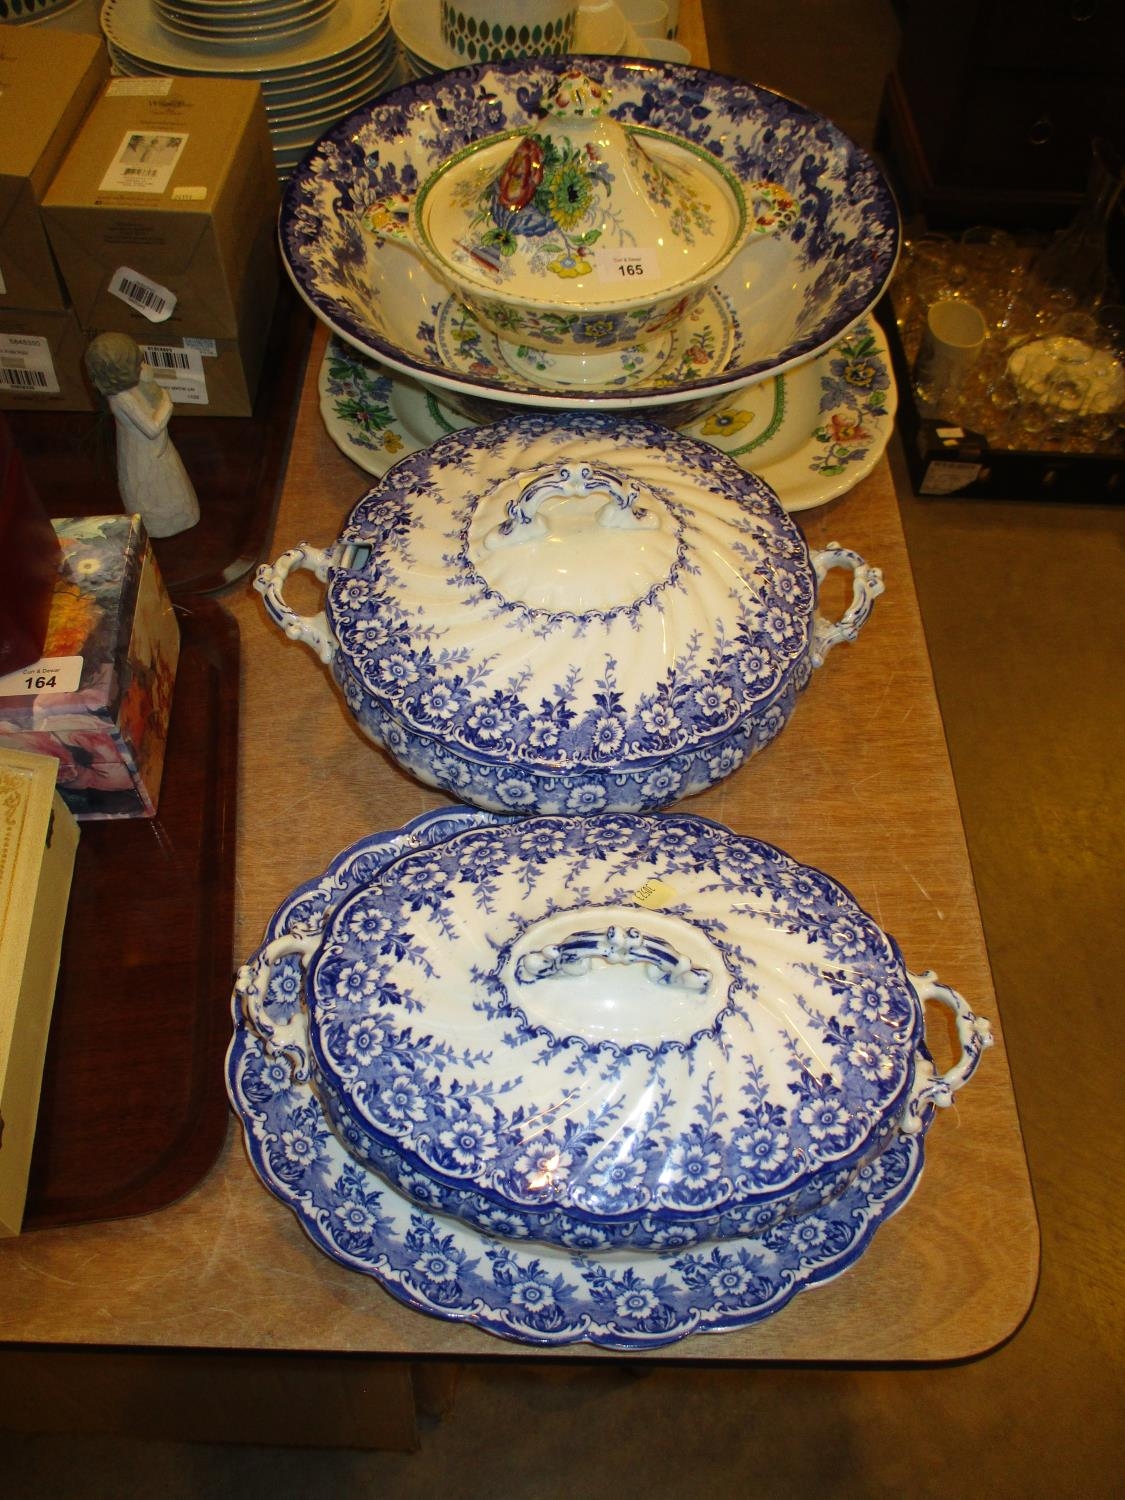 Masons Tureen and Ashet, Blue and White Basin and 2 Tureens